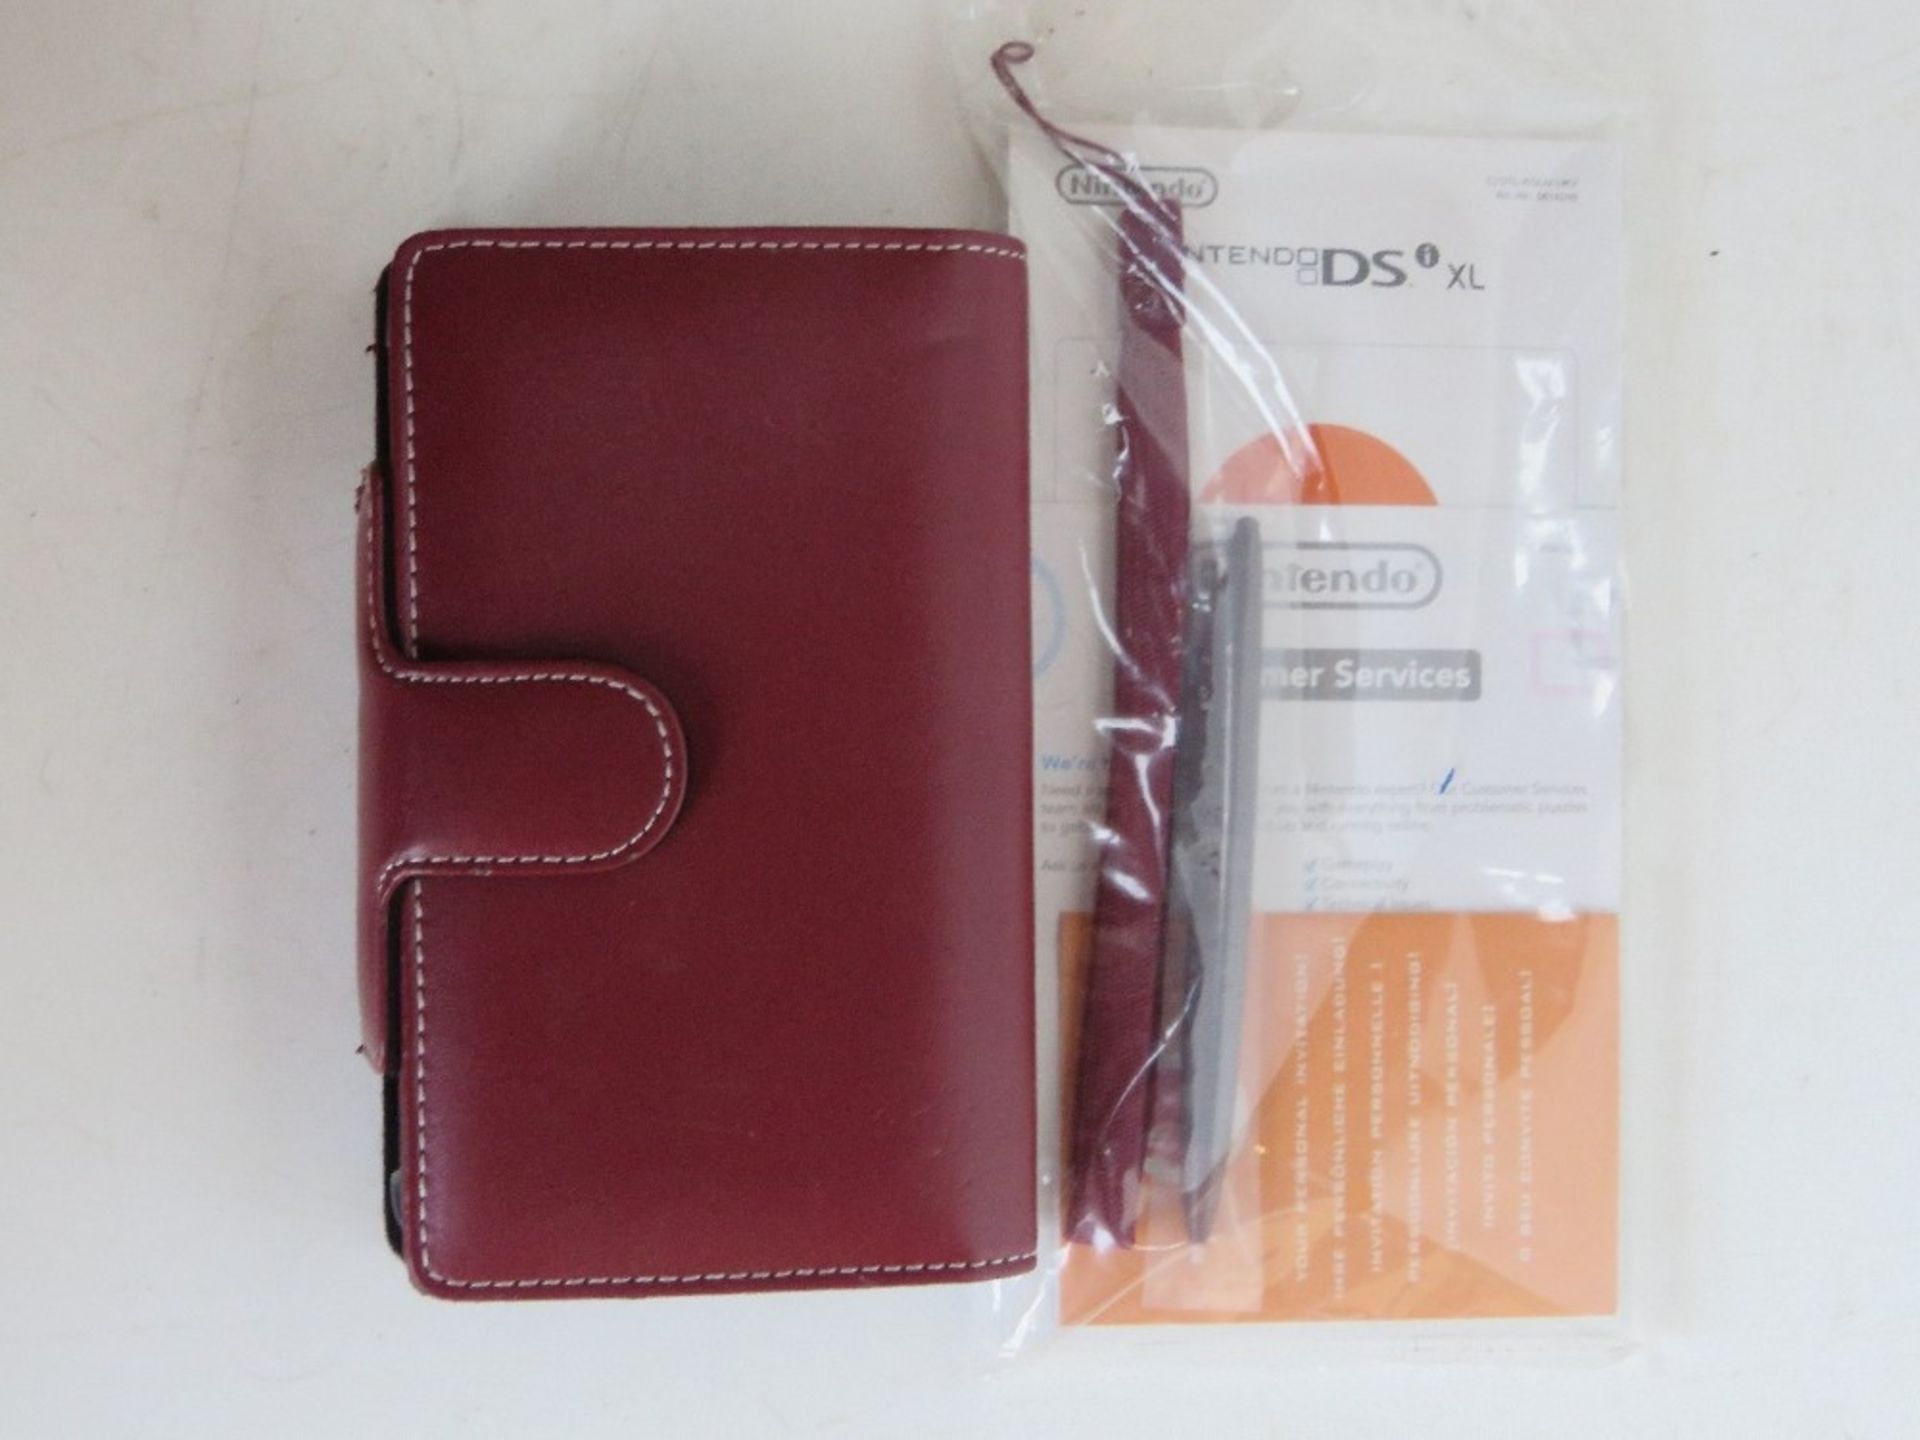 A Nintendo DS XL in burgundy with case, instructions and stylus. - Image 2 of 2